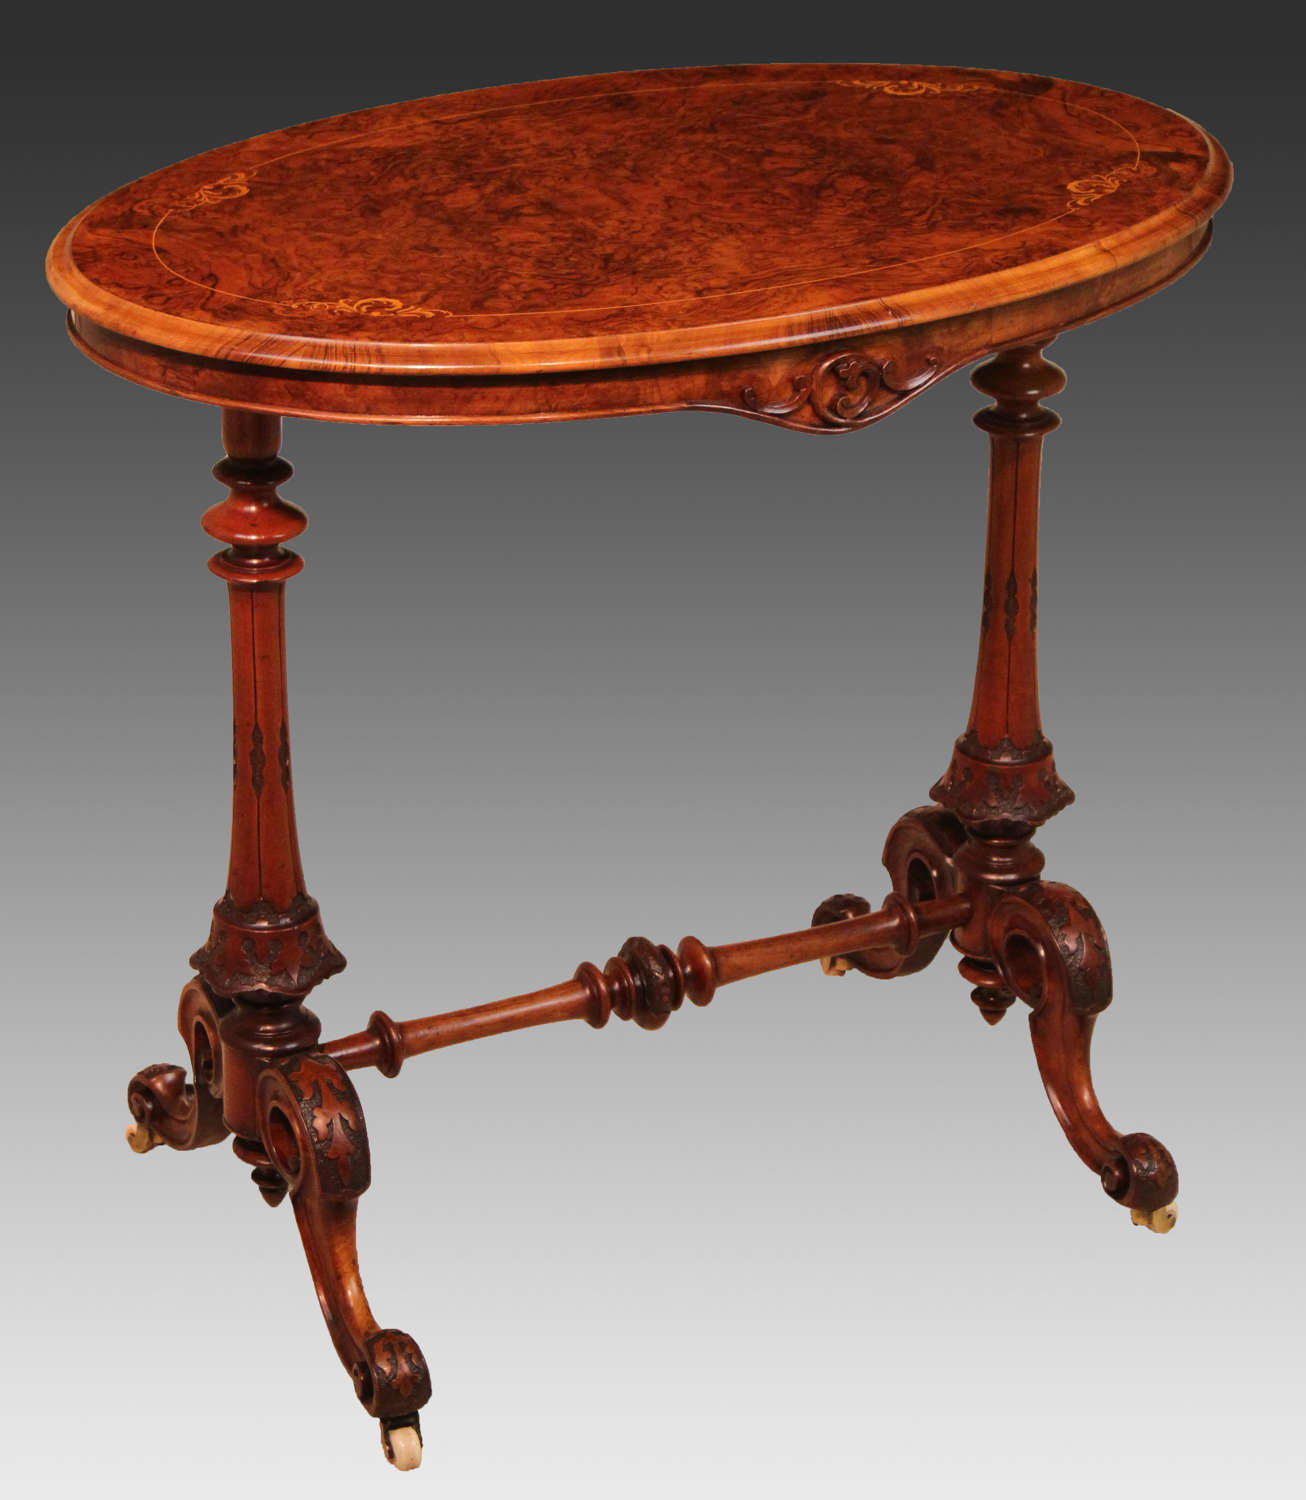 The Quality Victorian Burr-walnut Inlaid Baby Stretcher Table